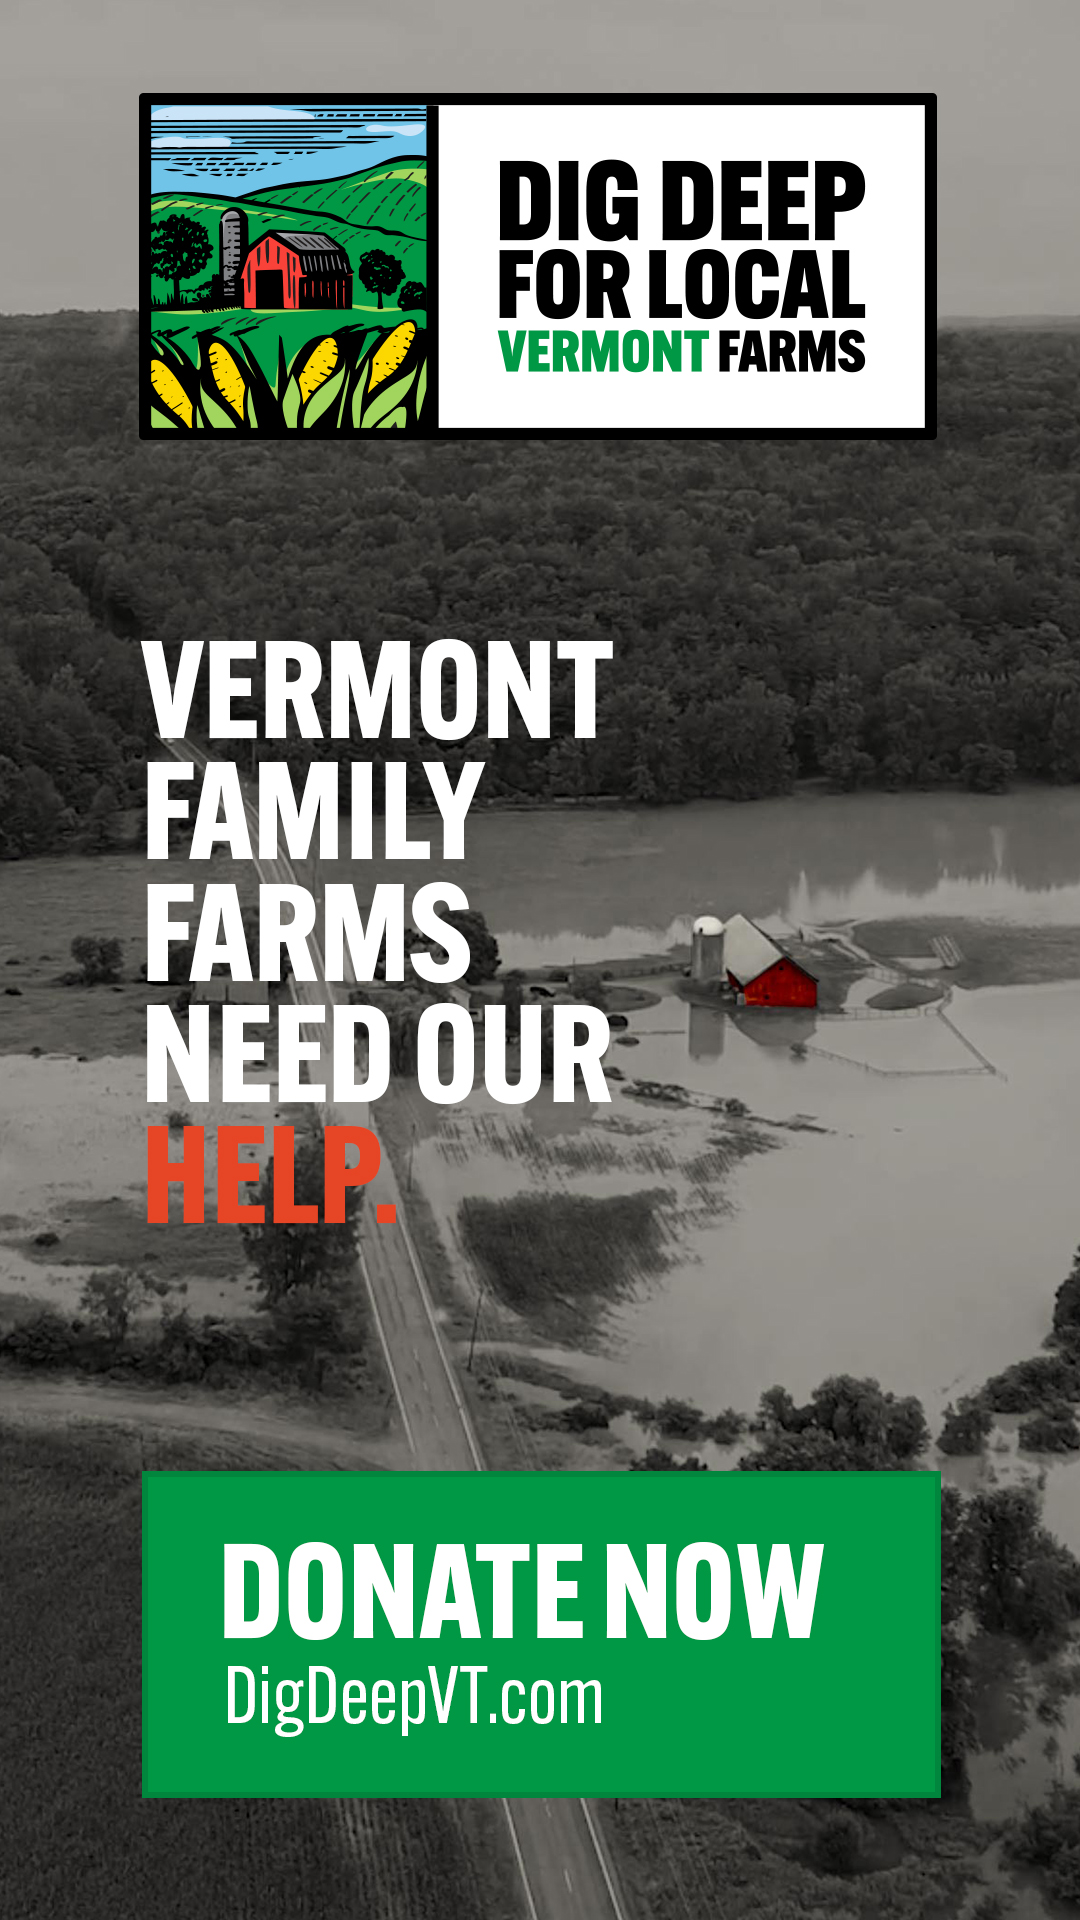 Share Dig Deep Vermont on your Instagram story.